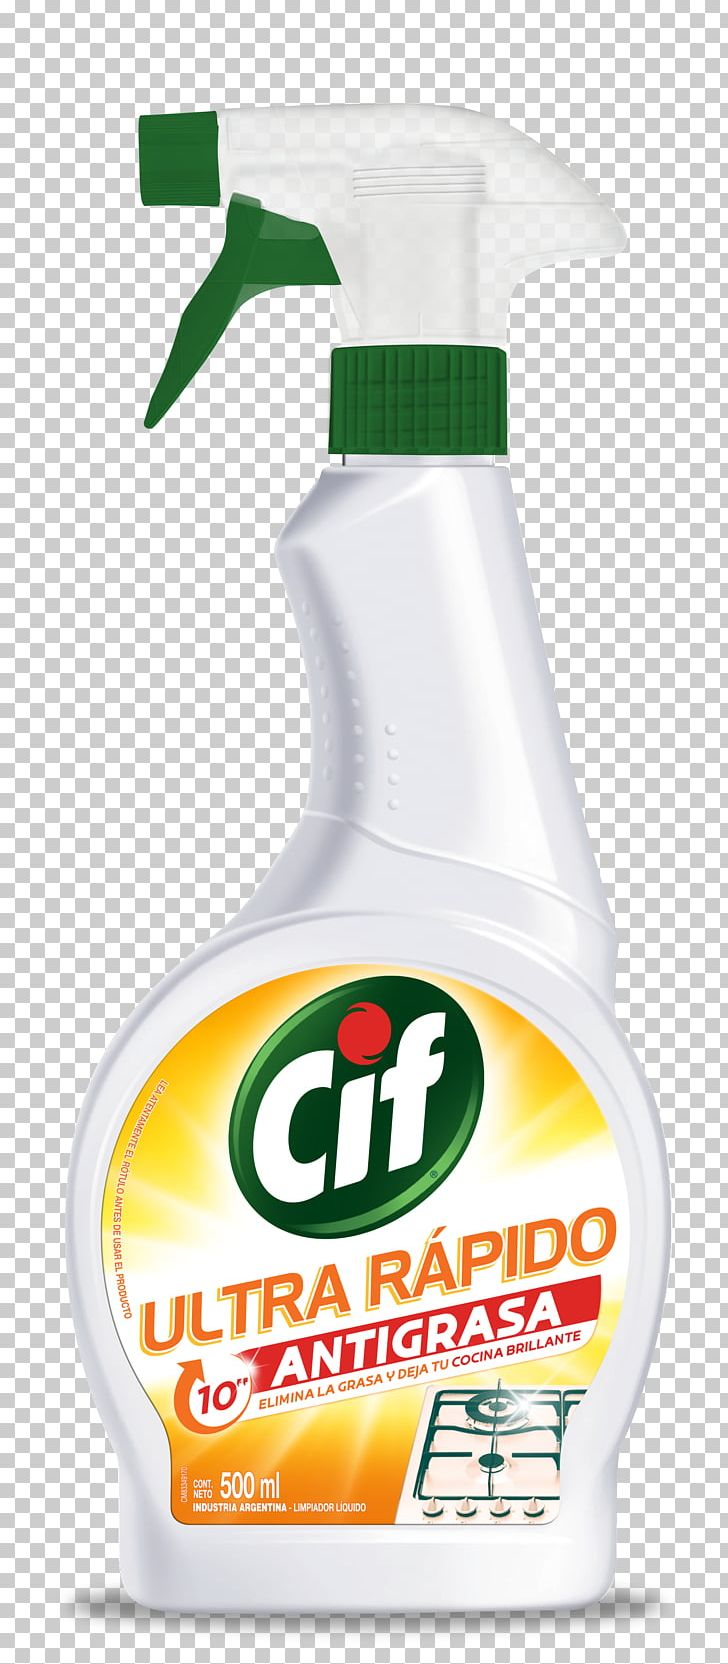 Cif Bathroom Cleaning Price Soap PNG, Clipart, Bathroom, Chlorine, Cif, Cleaning, Detergent Free PNG Download